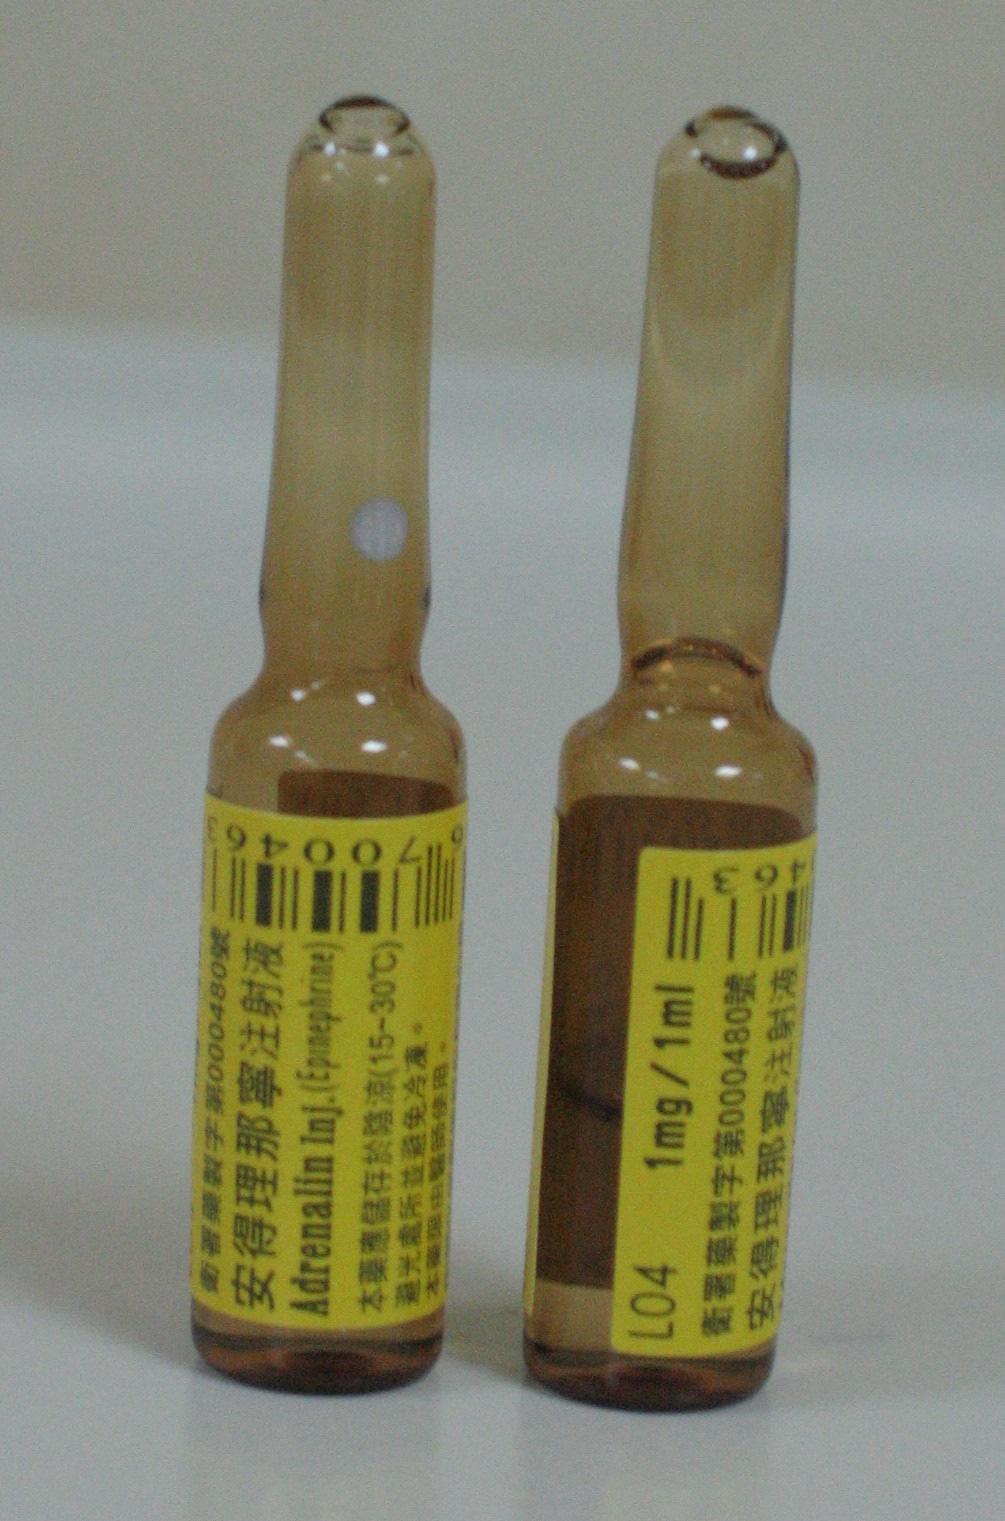 Dopamine - dosage Continuous infusions (ug/kg/min) Low dose: 1~5 (dopaminergic